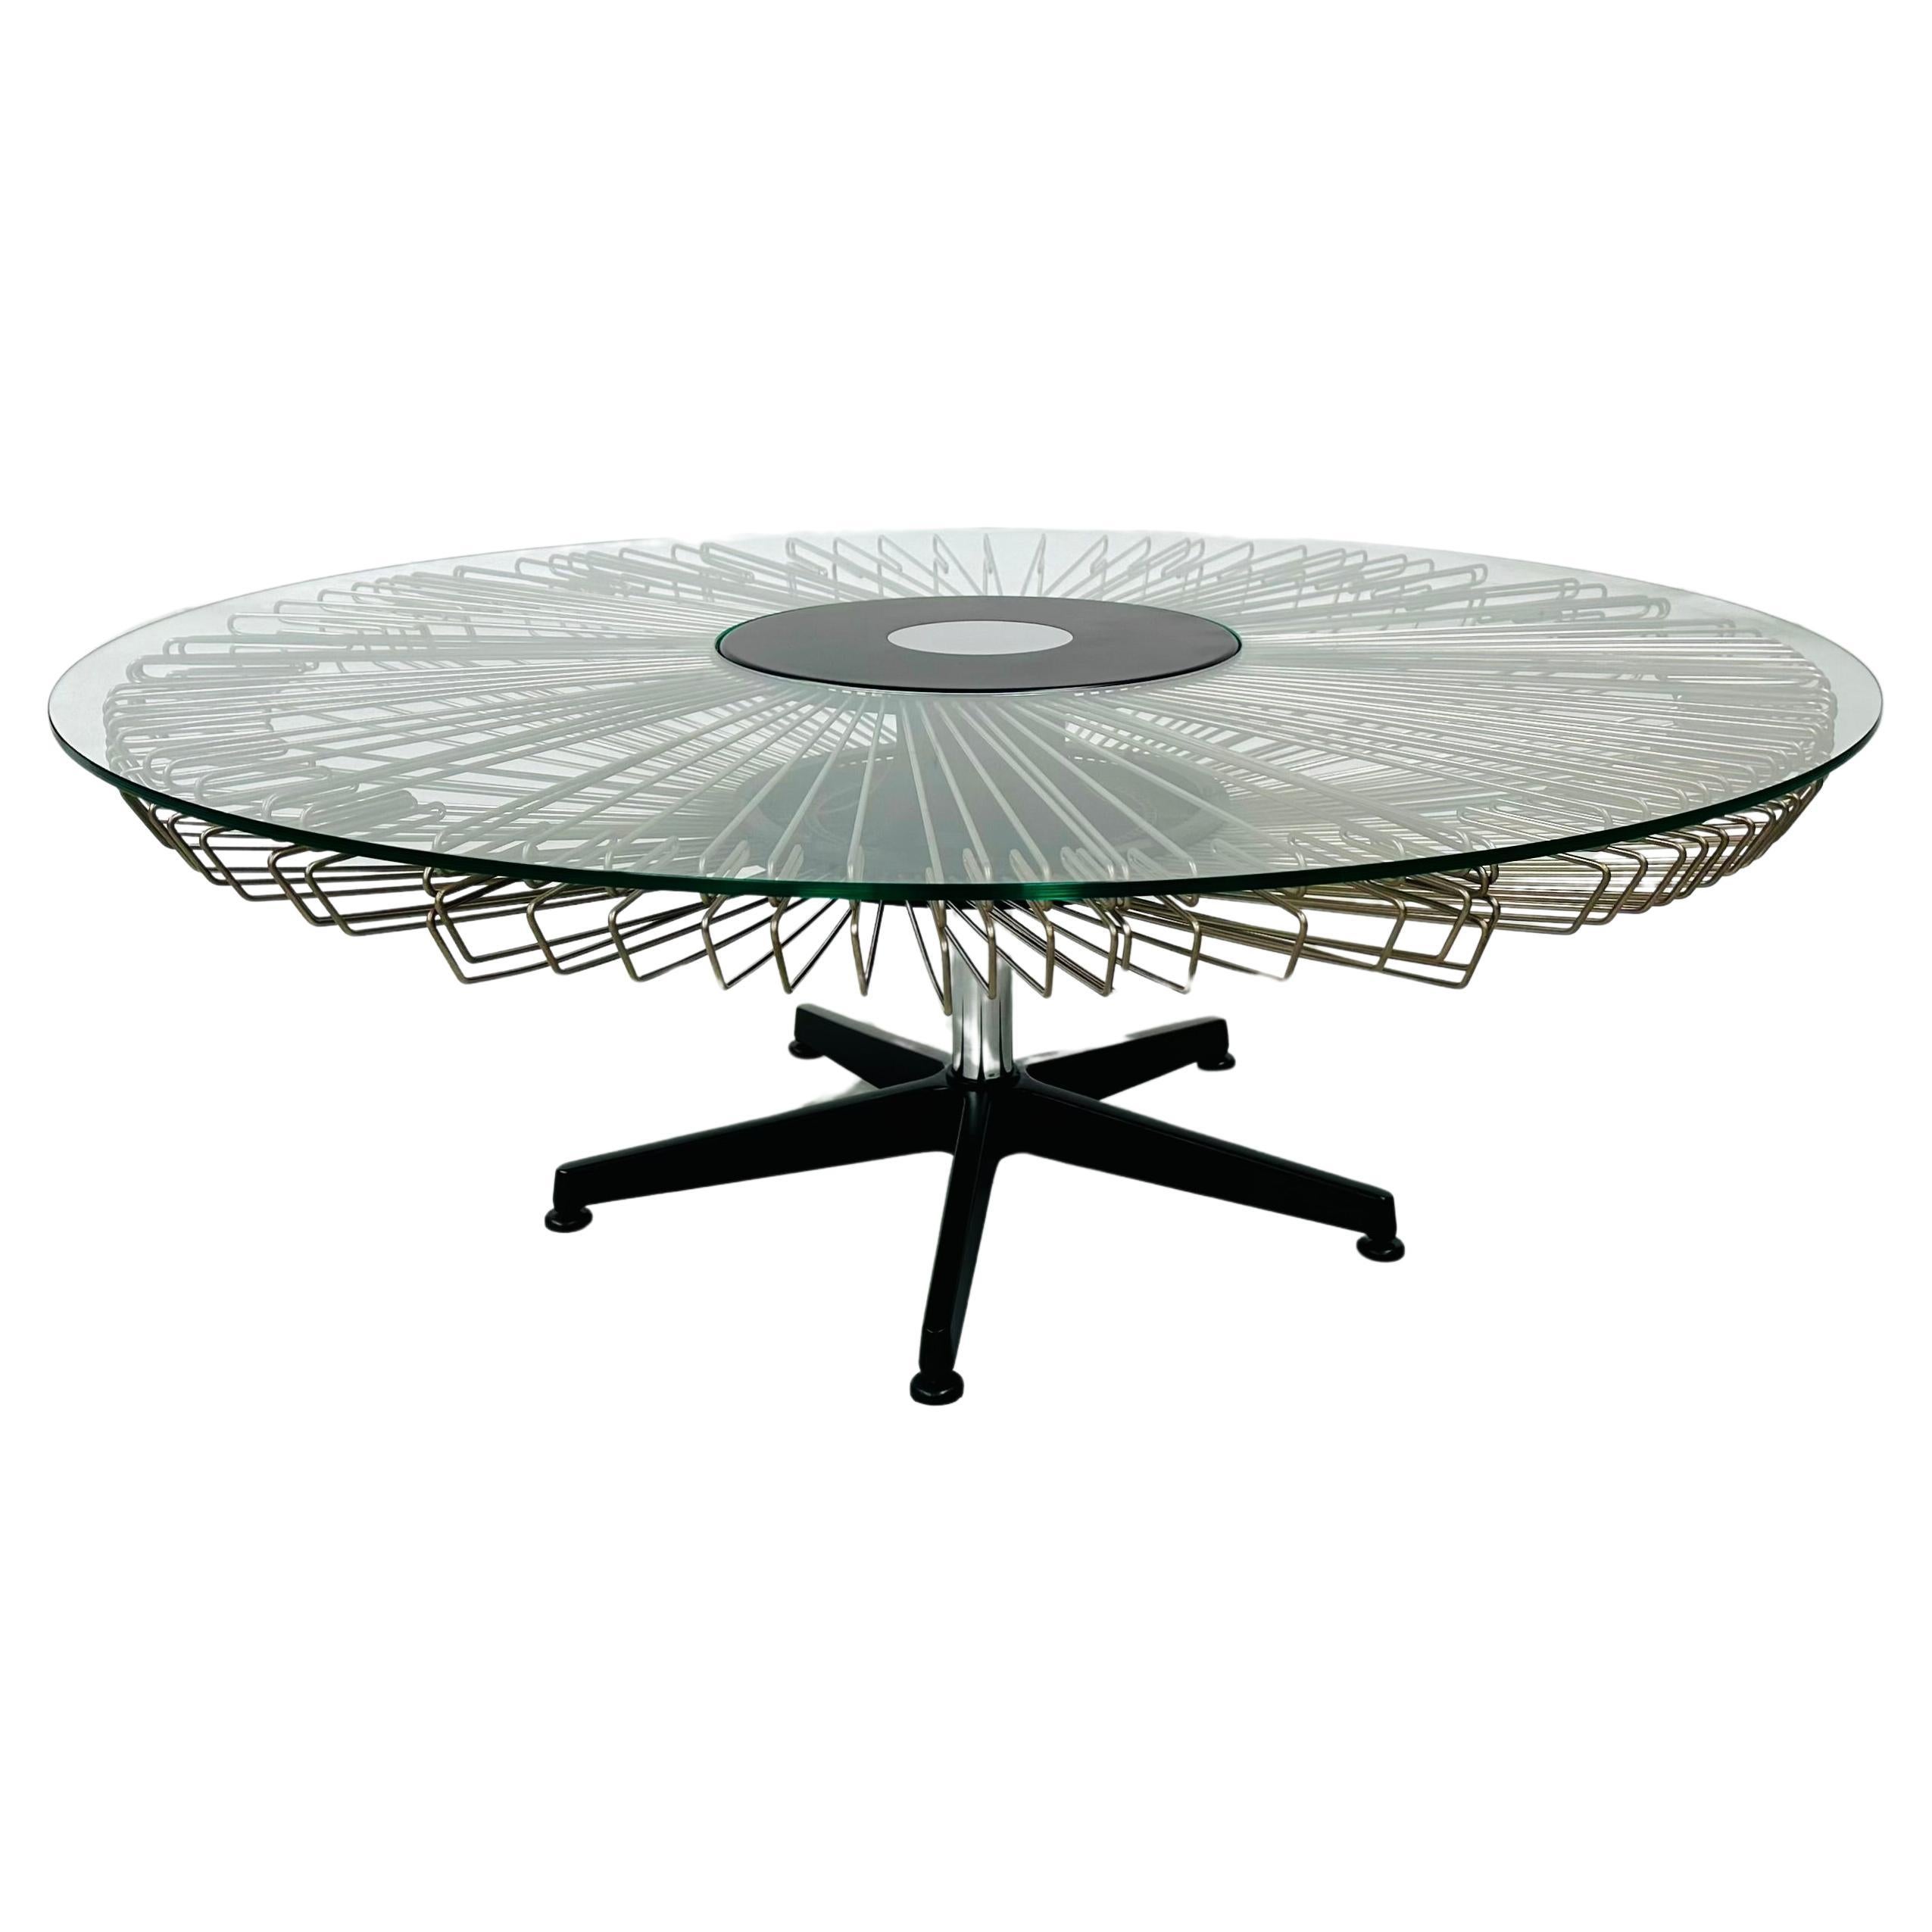 Italian Rotating Glass and Metal Coffee Table designed for Prada, 1990s. For Sale